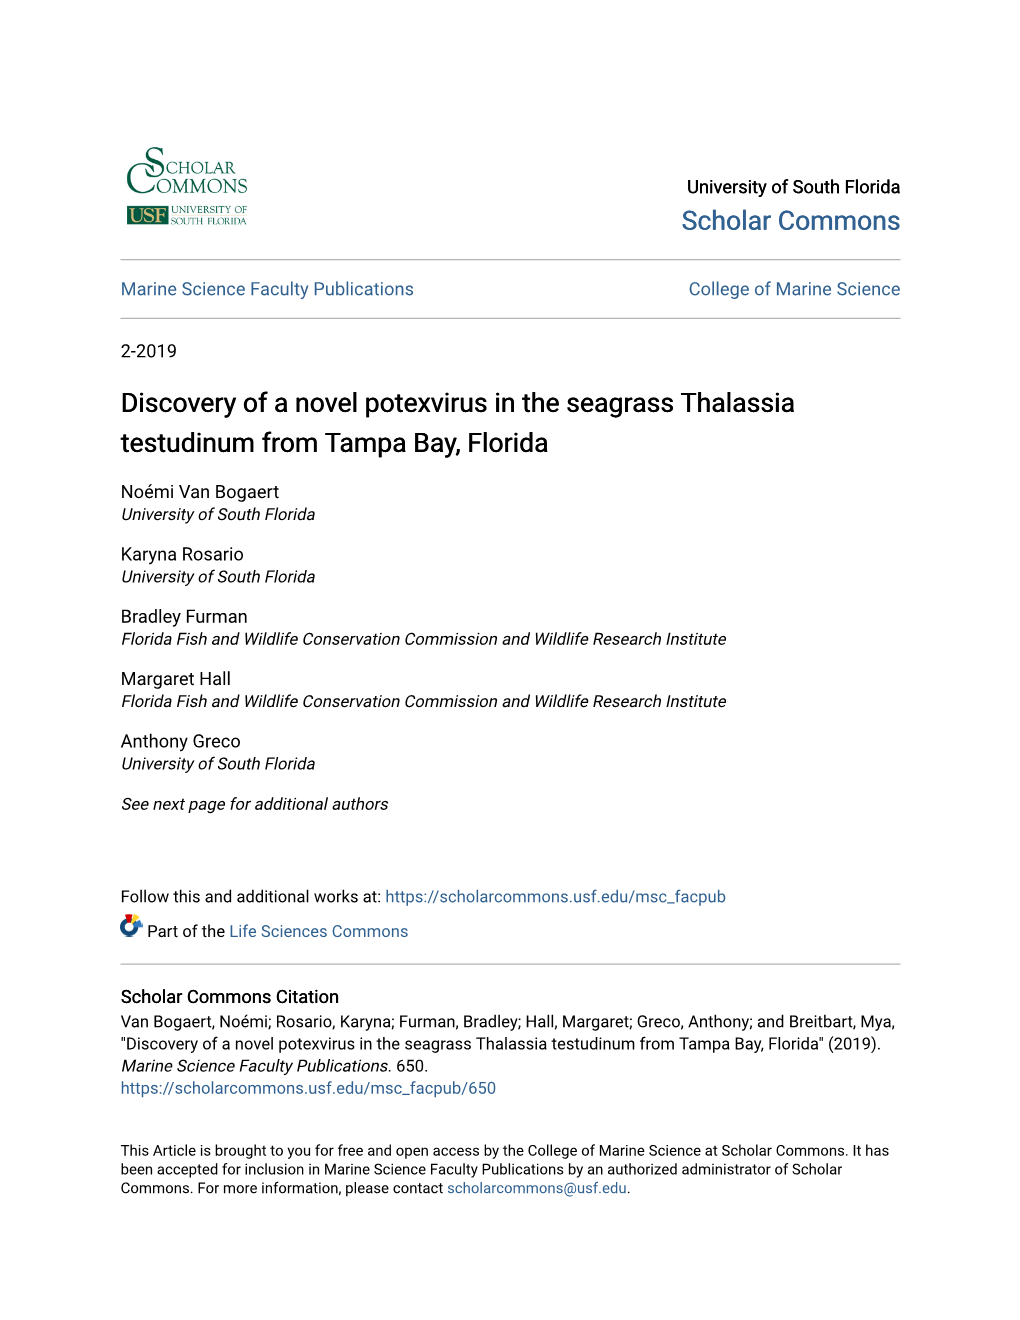 Discovery of a Novel Potexvirus in the Seagrass Thalassia Testudinum from Tampa Bay, Florida